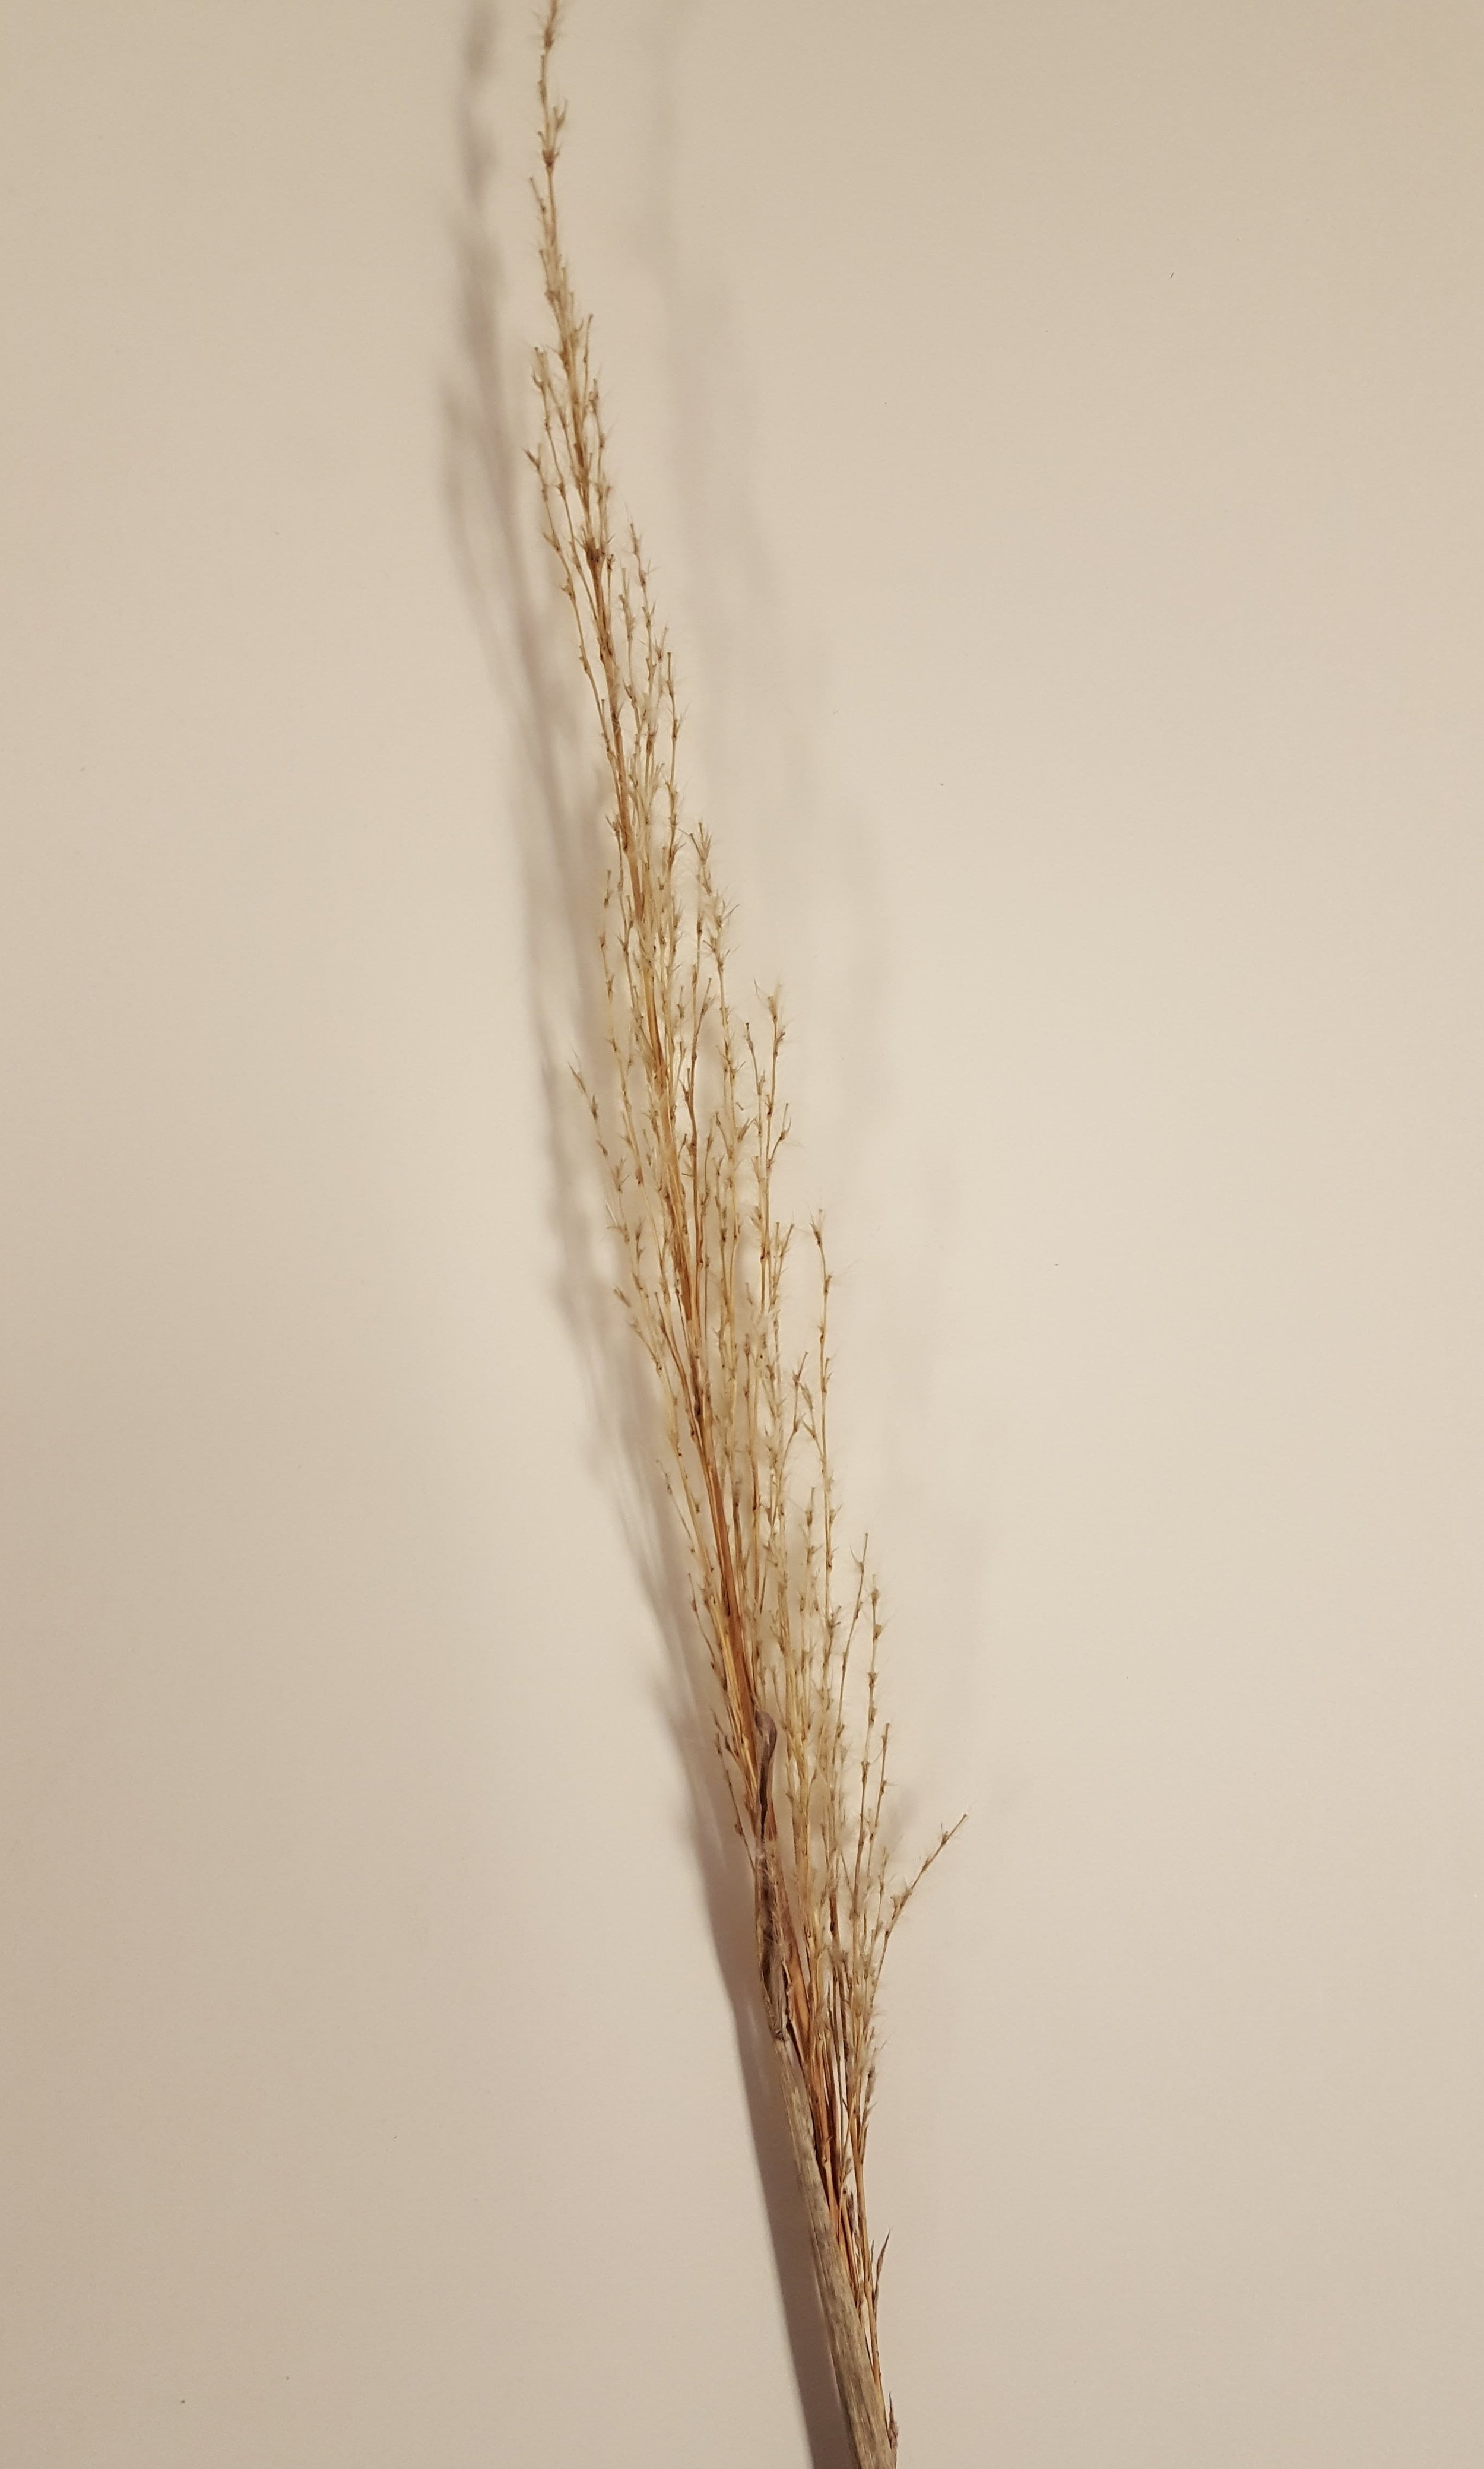 The dormant seed head of a Ravenna Grass individual